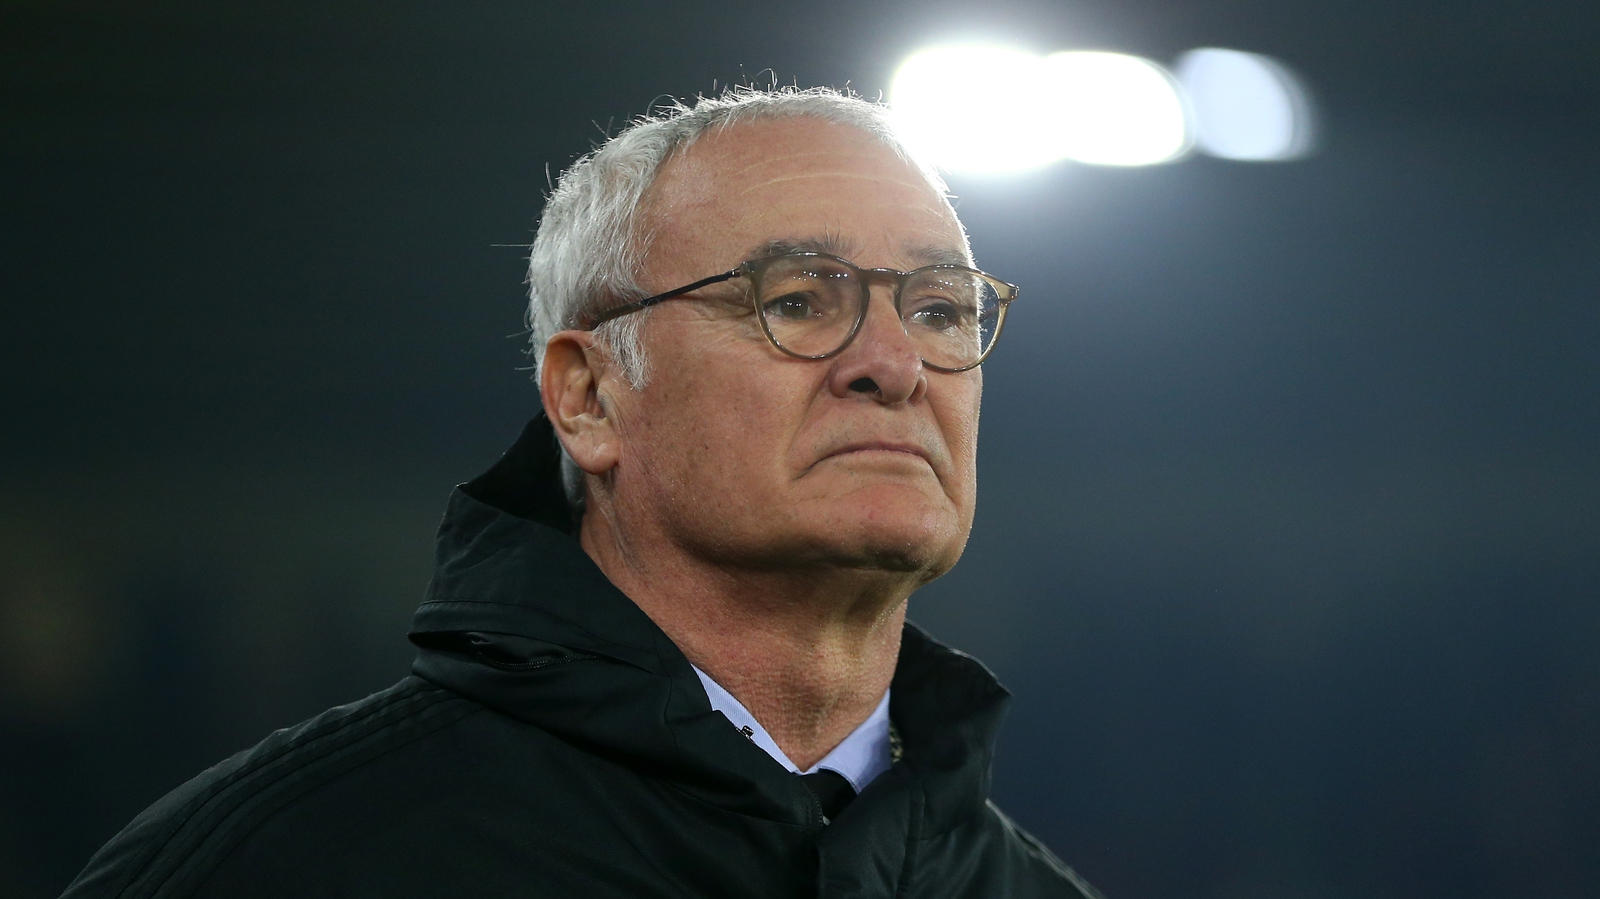 Ranieri returns for second stint as Roma manager